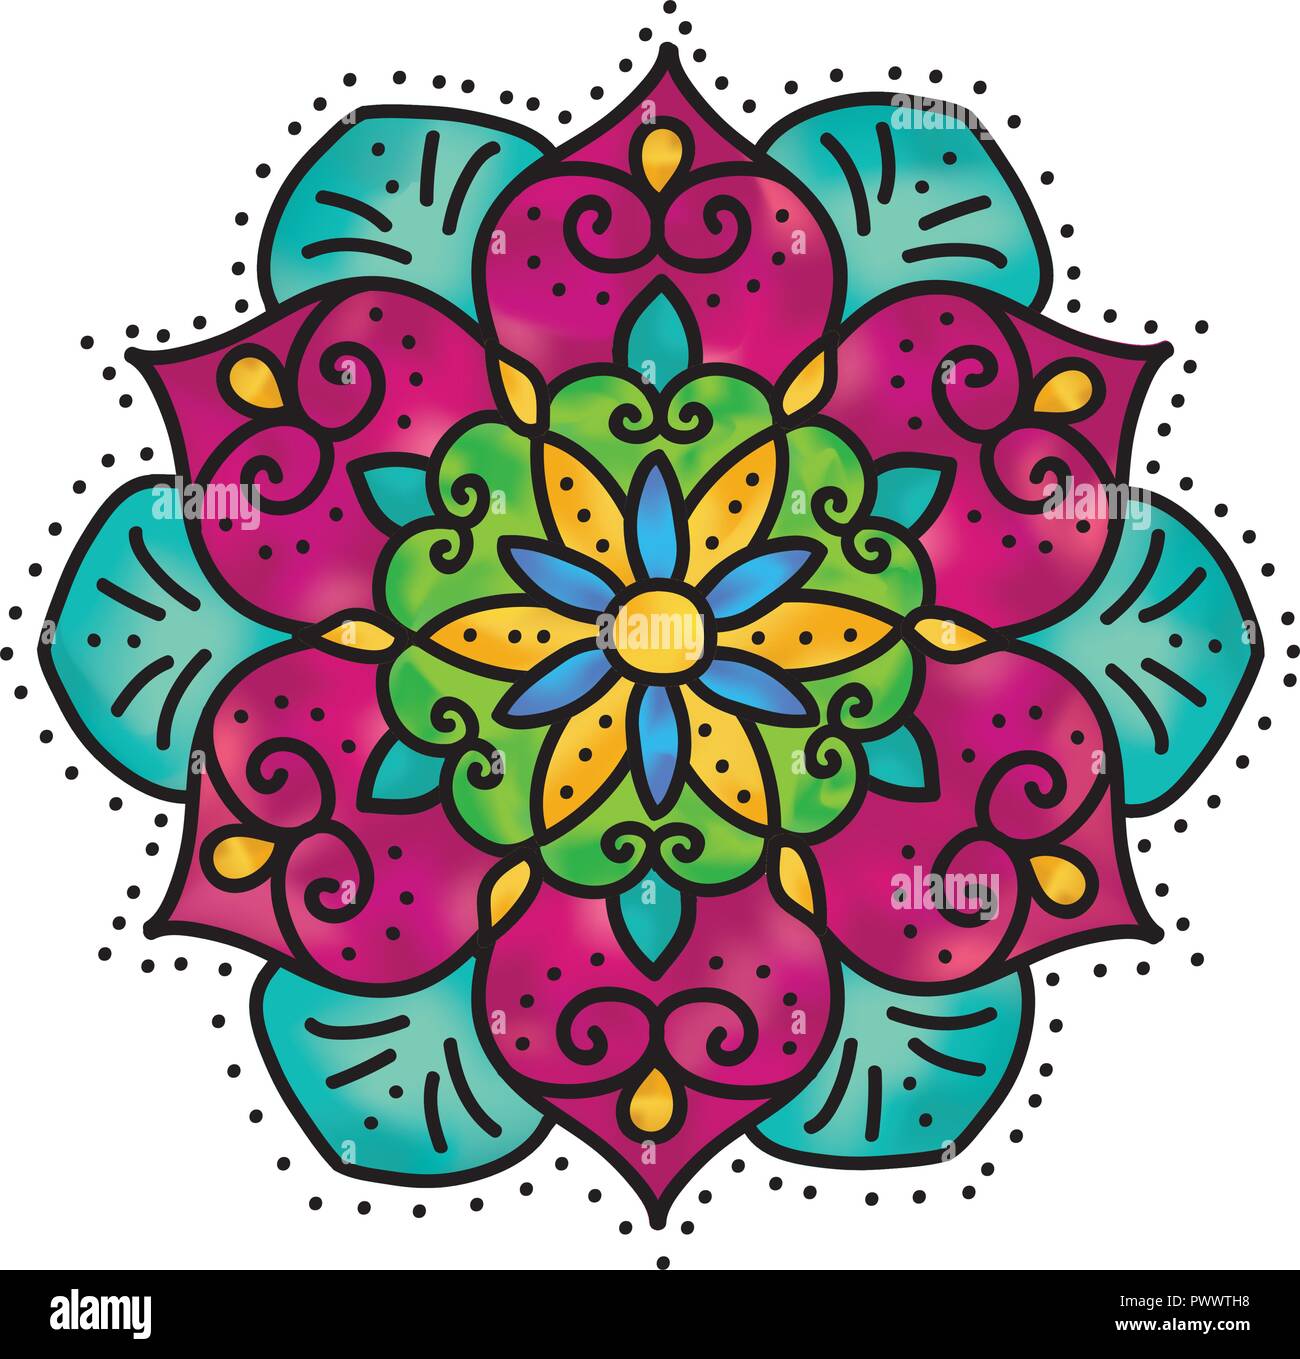 Premium Vector  Mandala design is a freehand drawing book for adults.